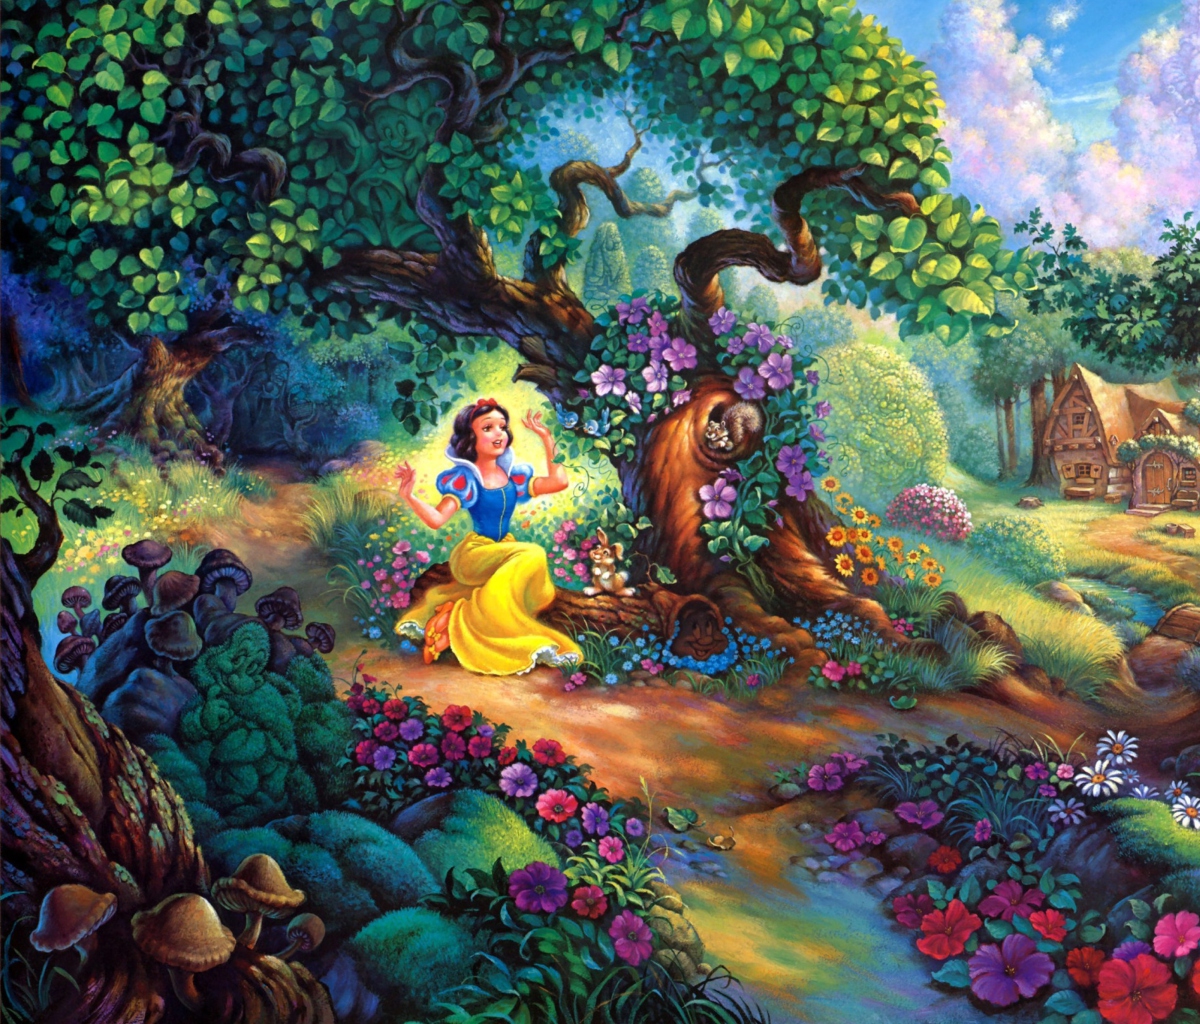 Das Snow White In Magical Forest Wallpaper 1200x1024